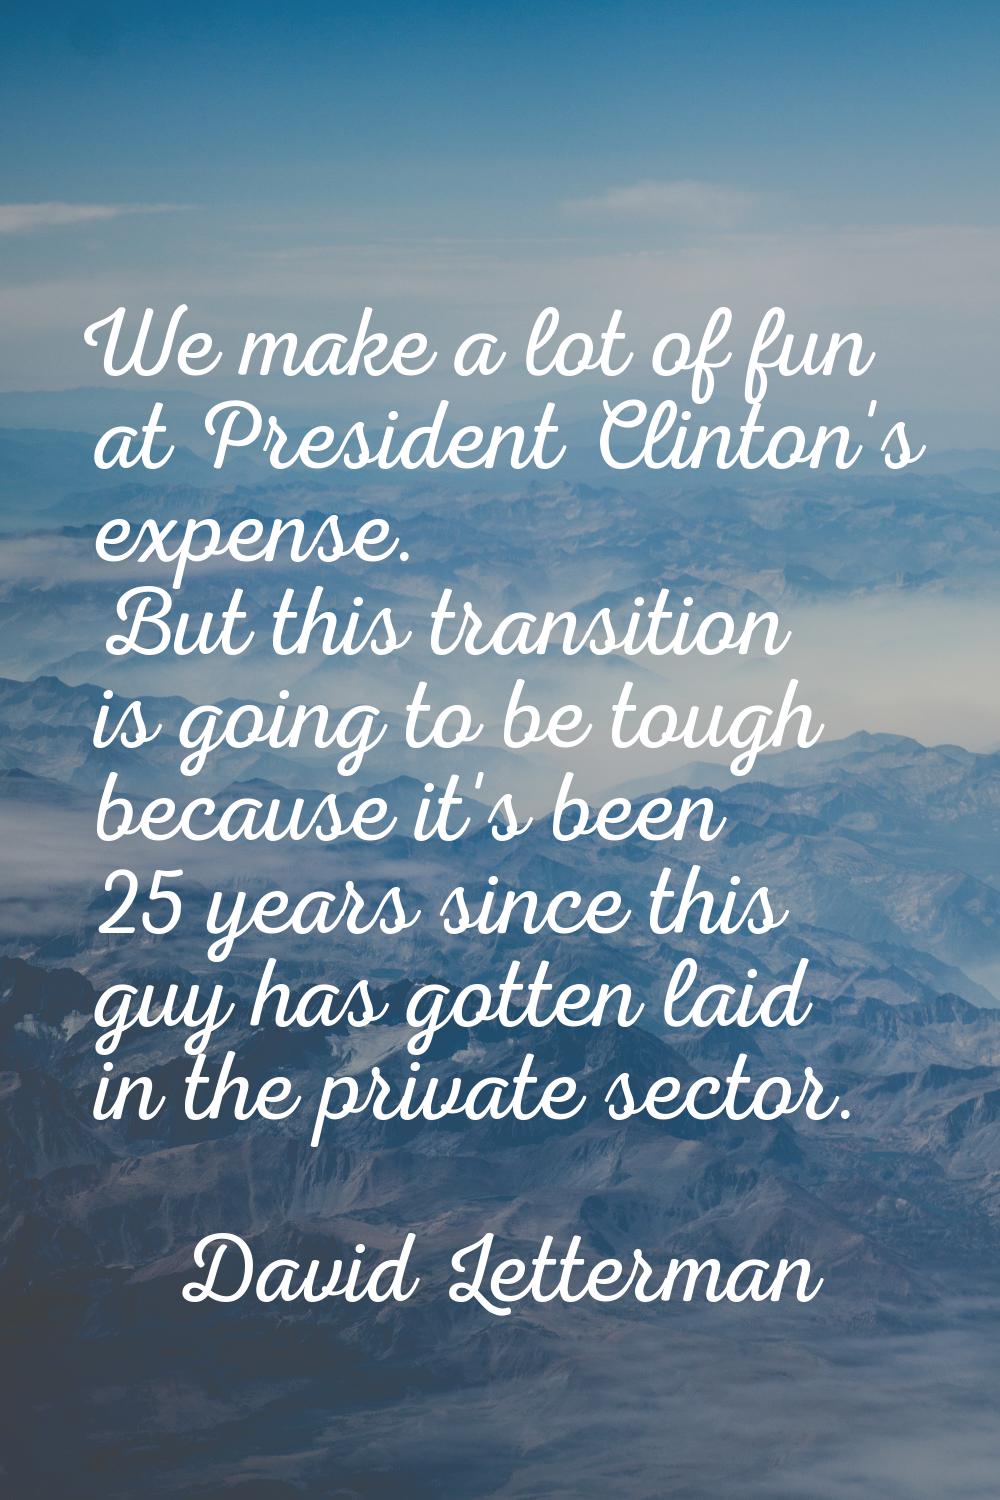 We make a lot of fun at President Clinton's expense. But this transition is going to be tough becau